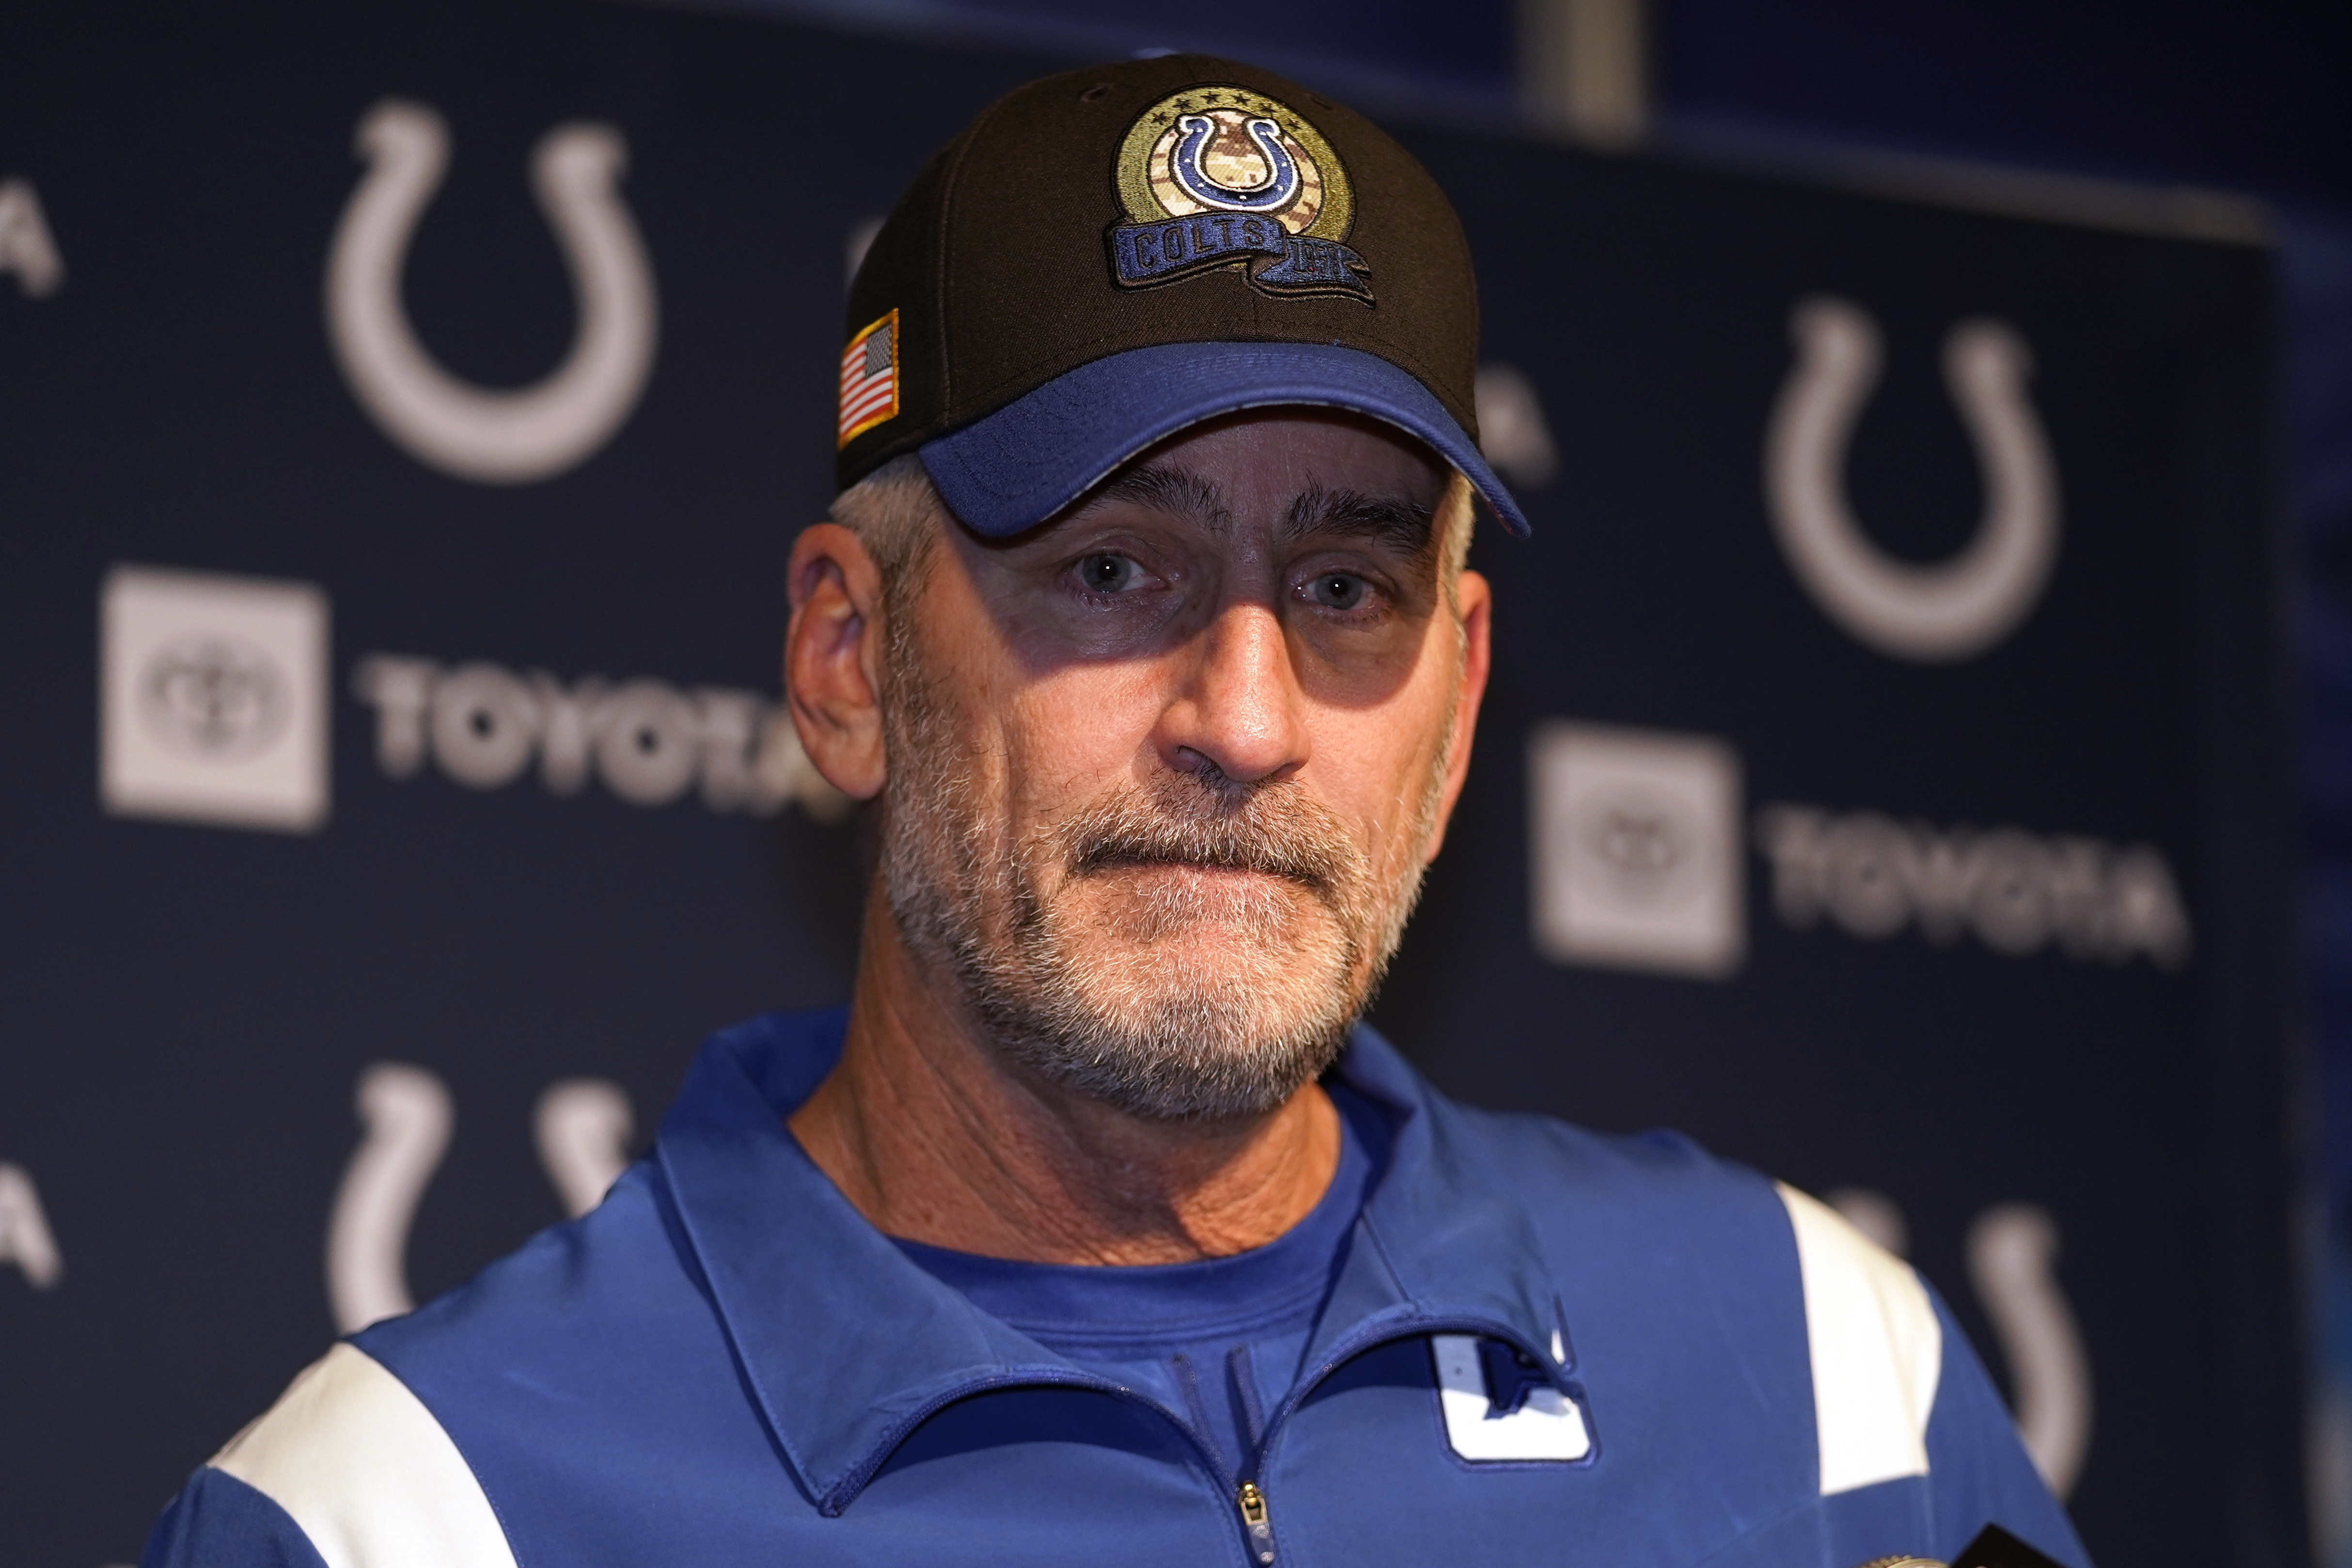 NFL talking heads, insiders stunned as Colts fire Frank Reich, hire